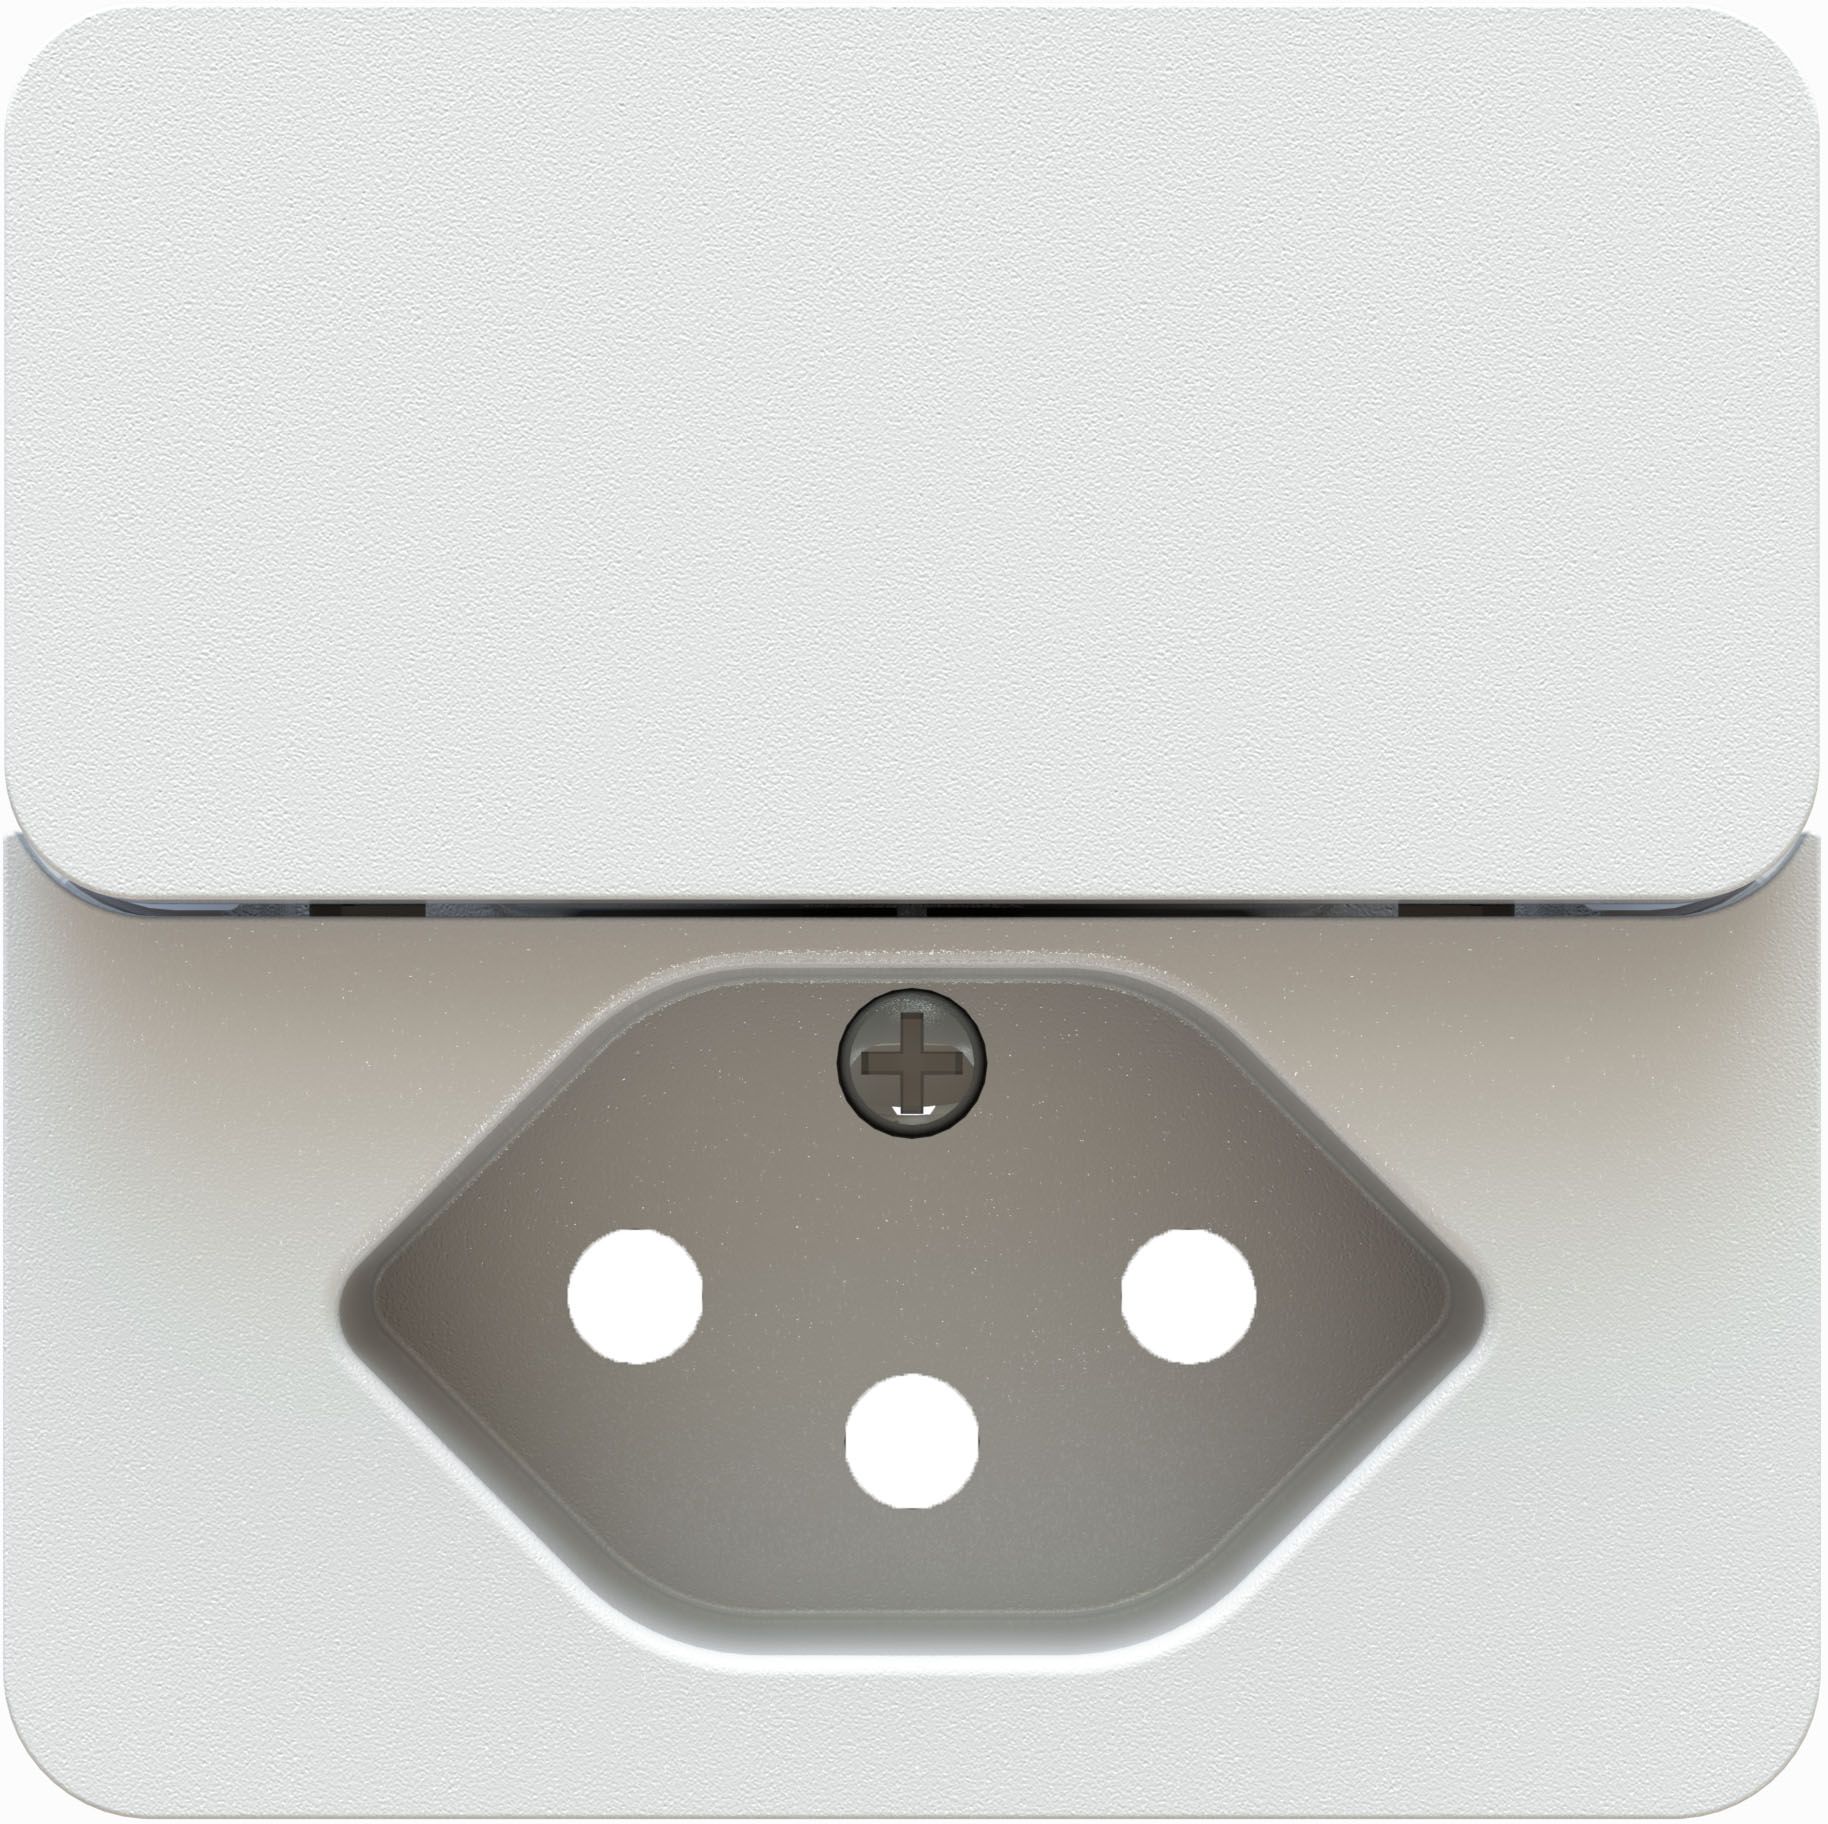 Central plate with knob for wall combined size